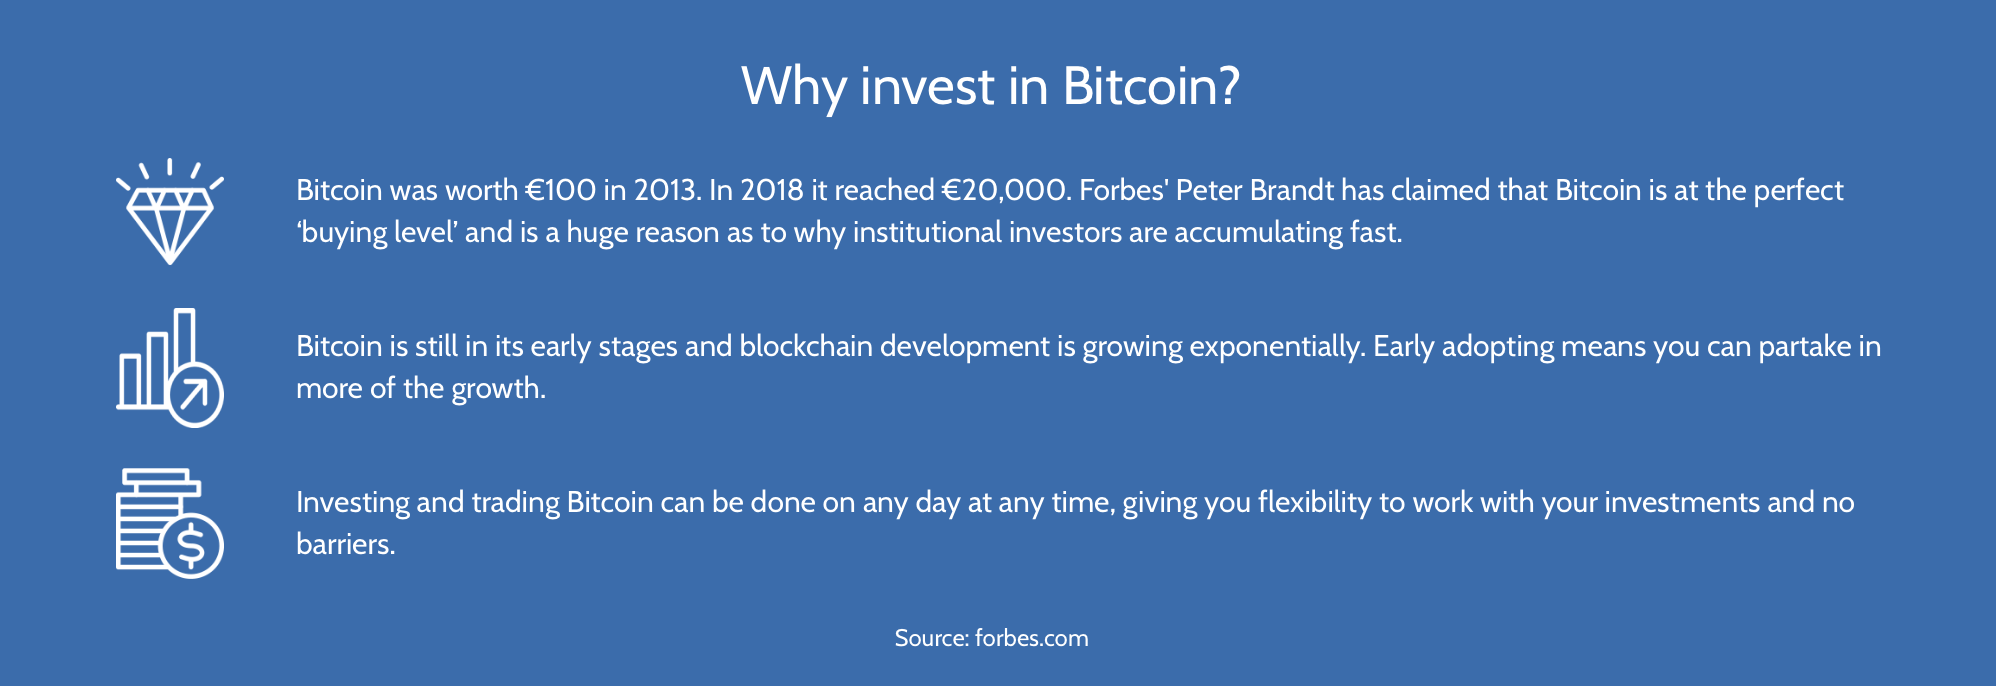 Reasons to invest in Bitcoin